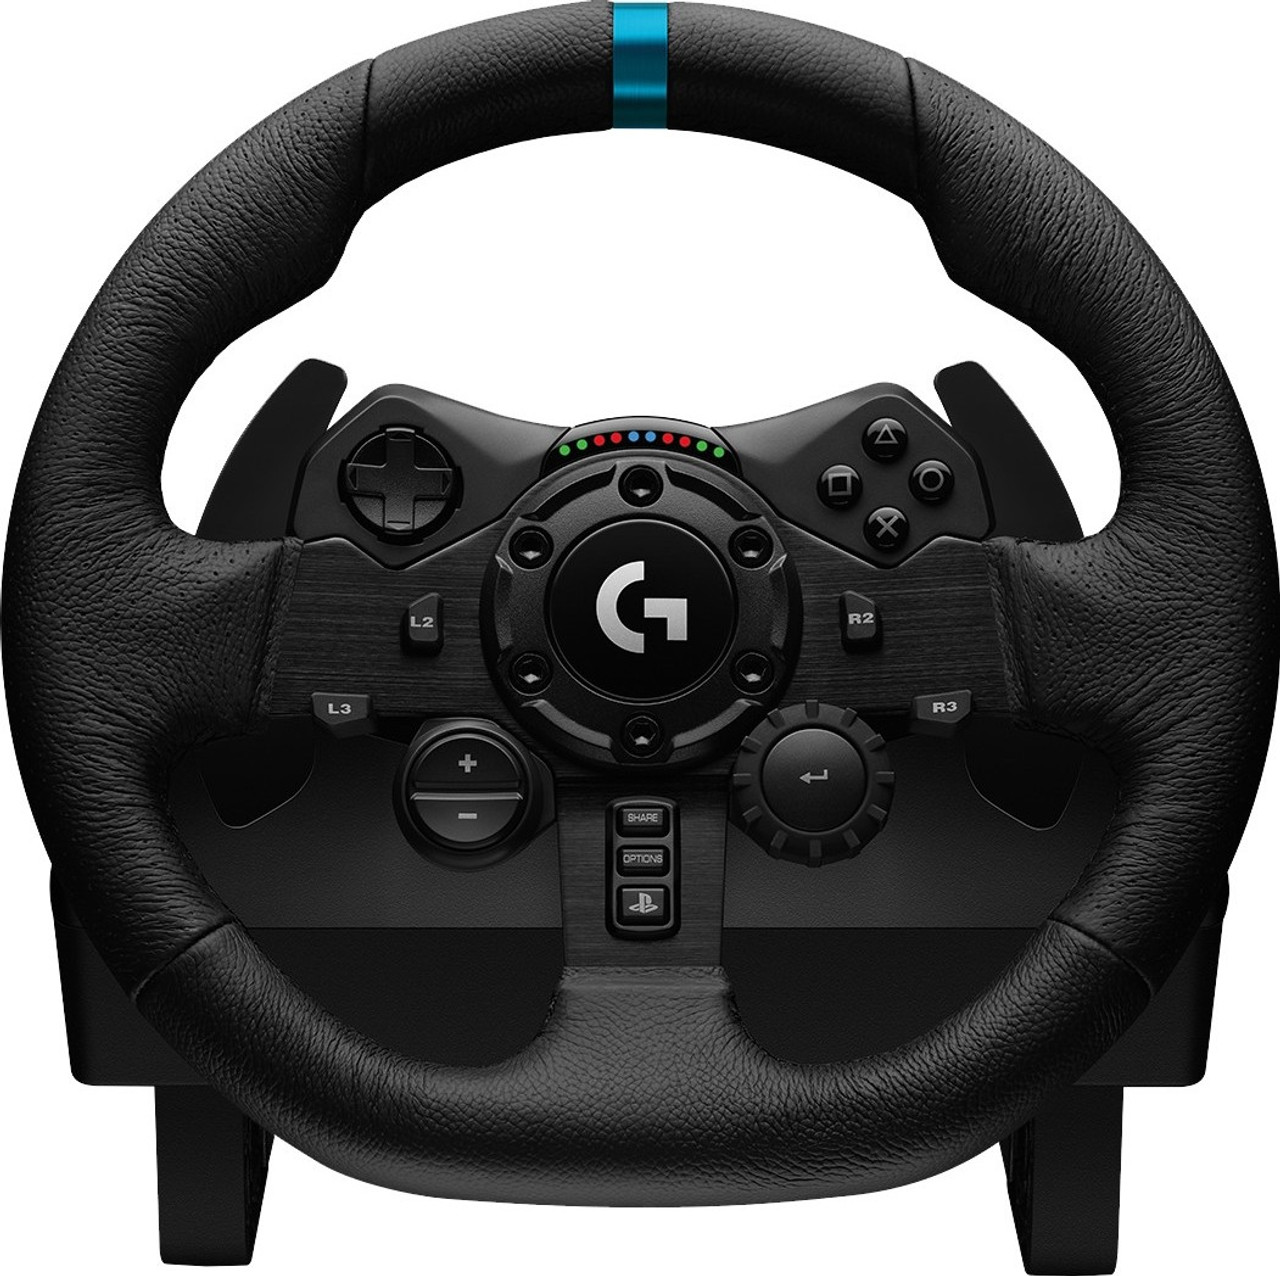 Logitech G29 Driving Force Racing Wheel for PlayStation 4/5 and PC